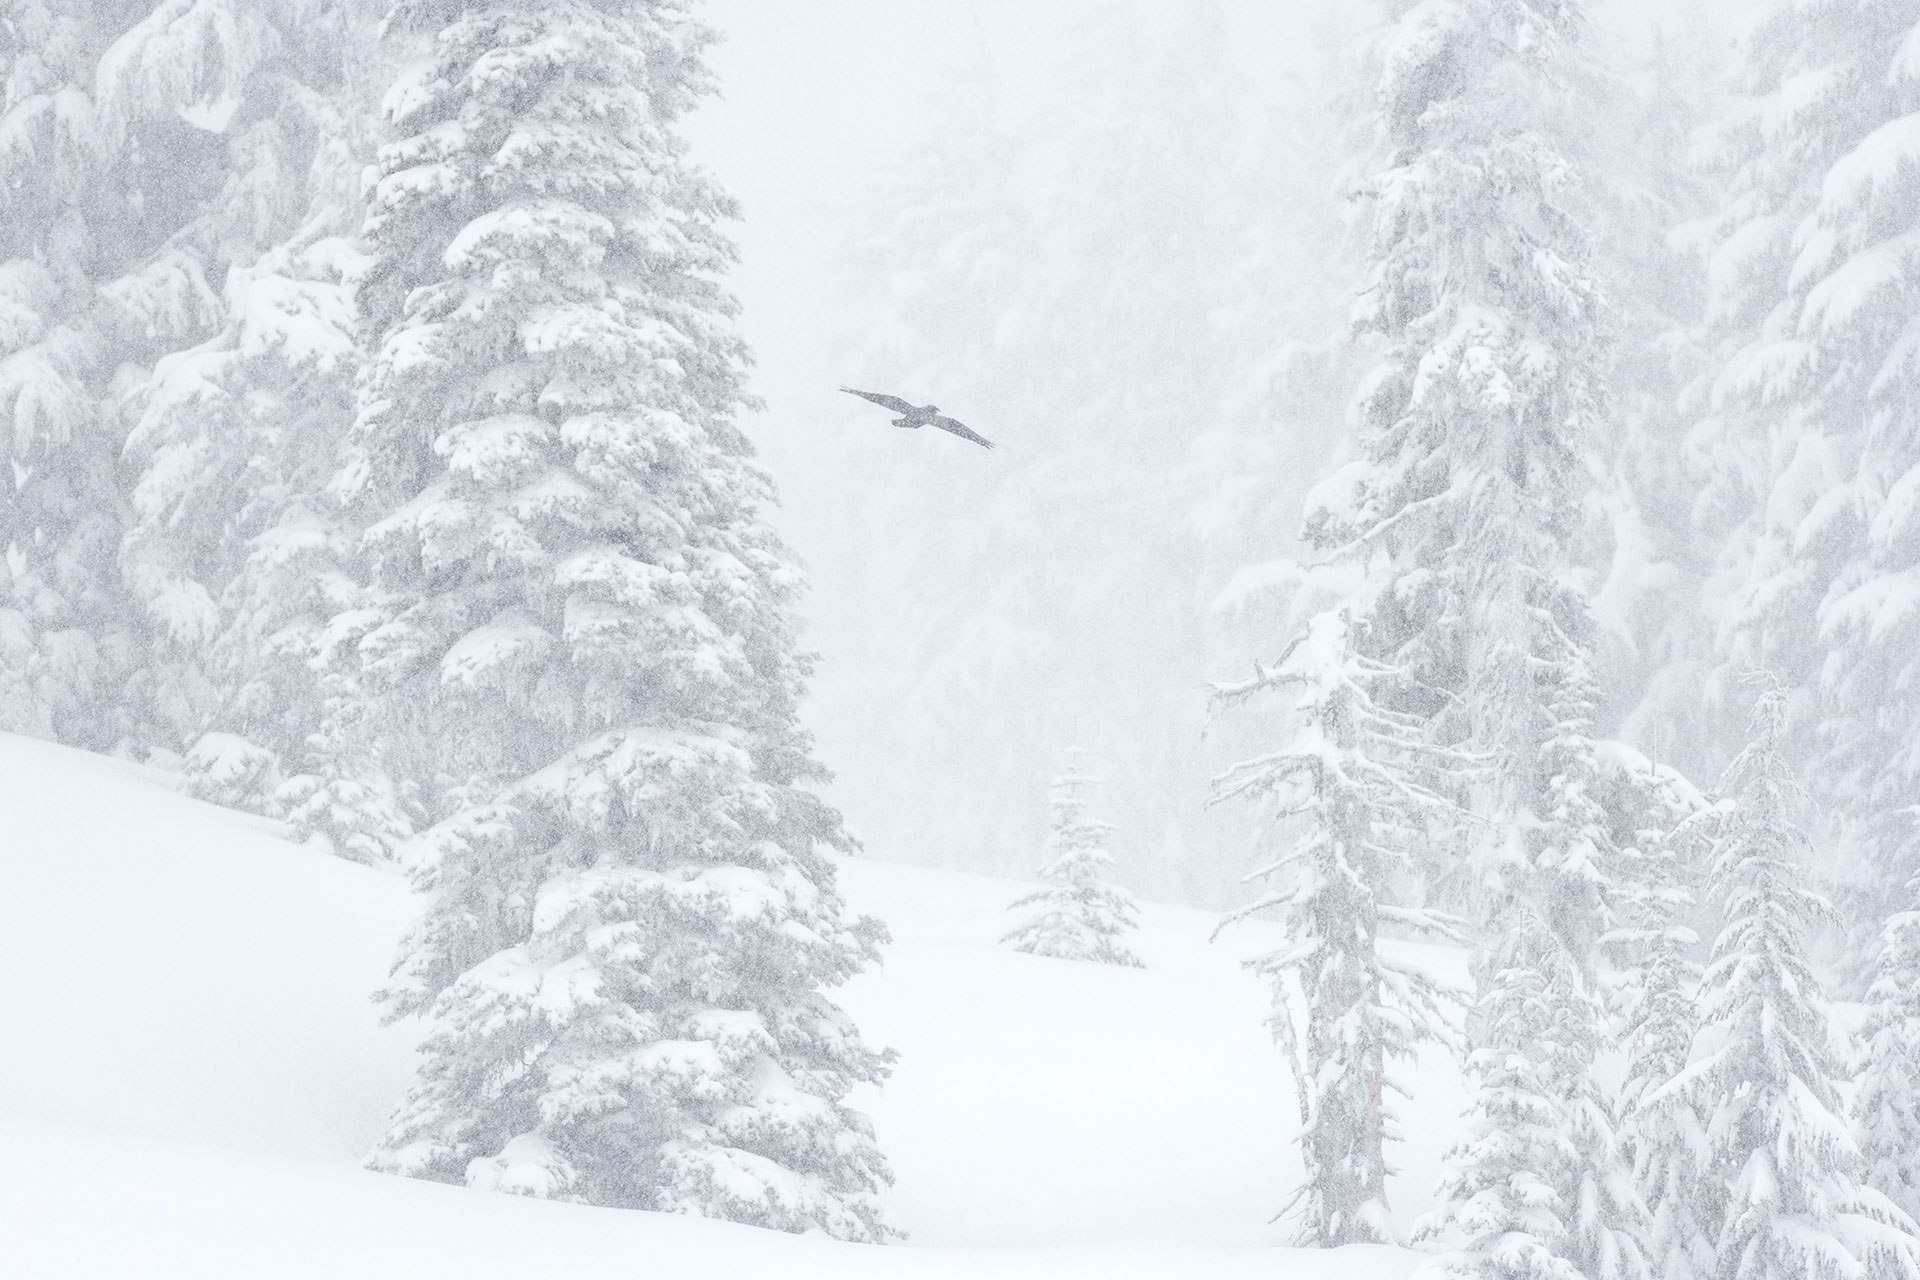 free bird raven photograph soaring in winter forest